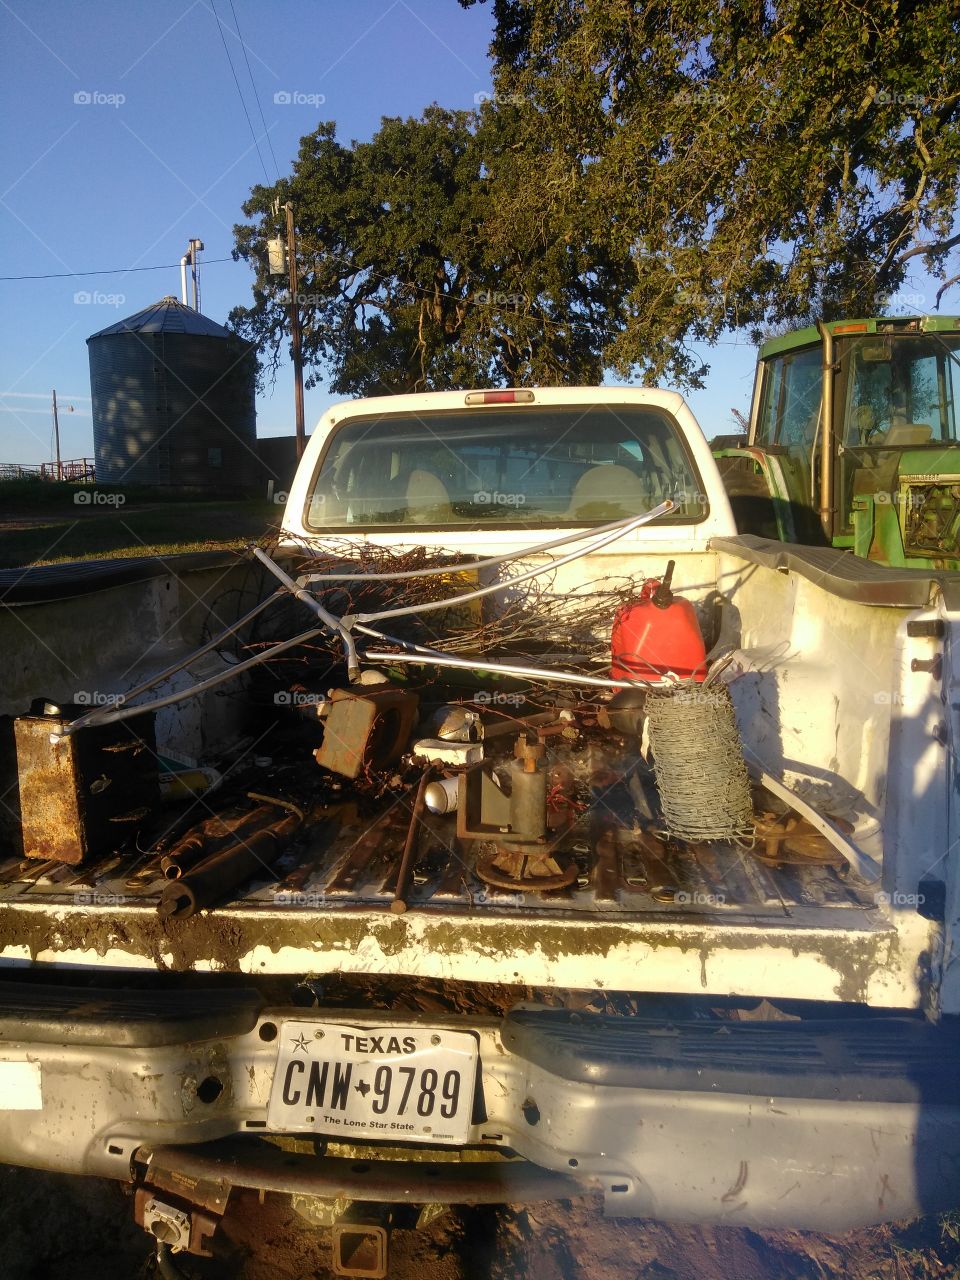 Ford F-250 power stroke with fencing and tools in back